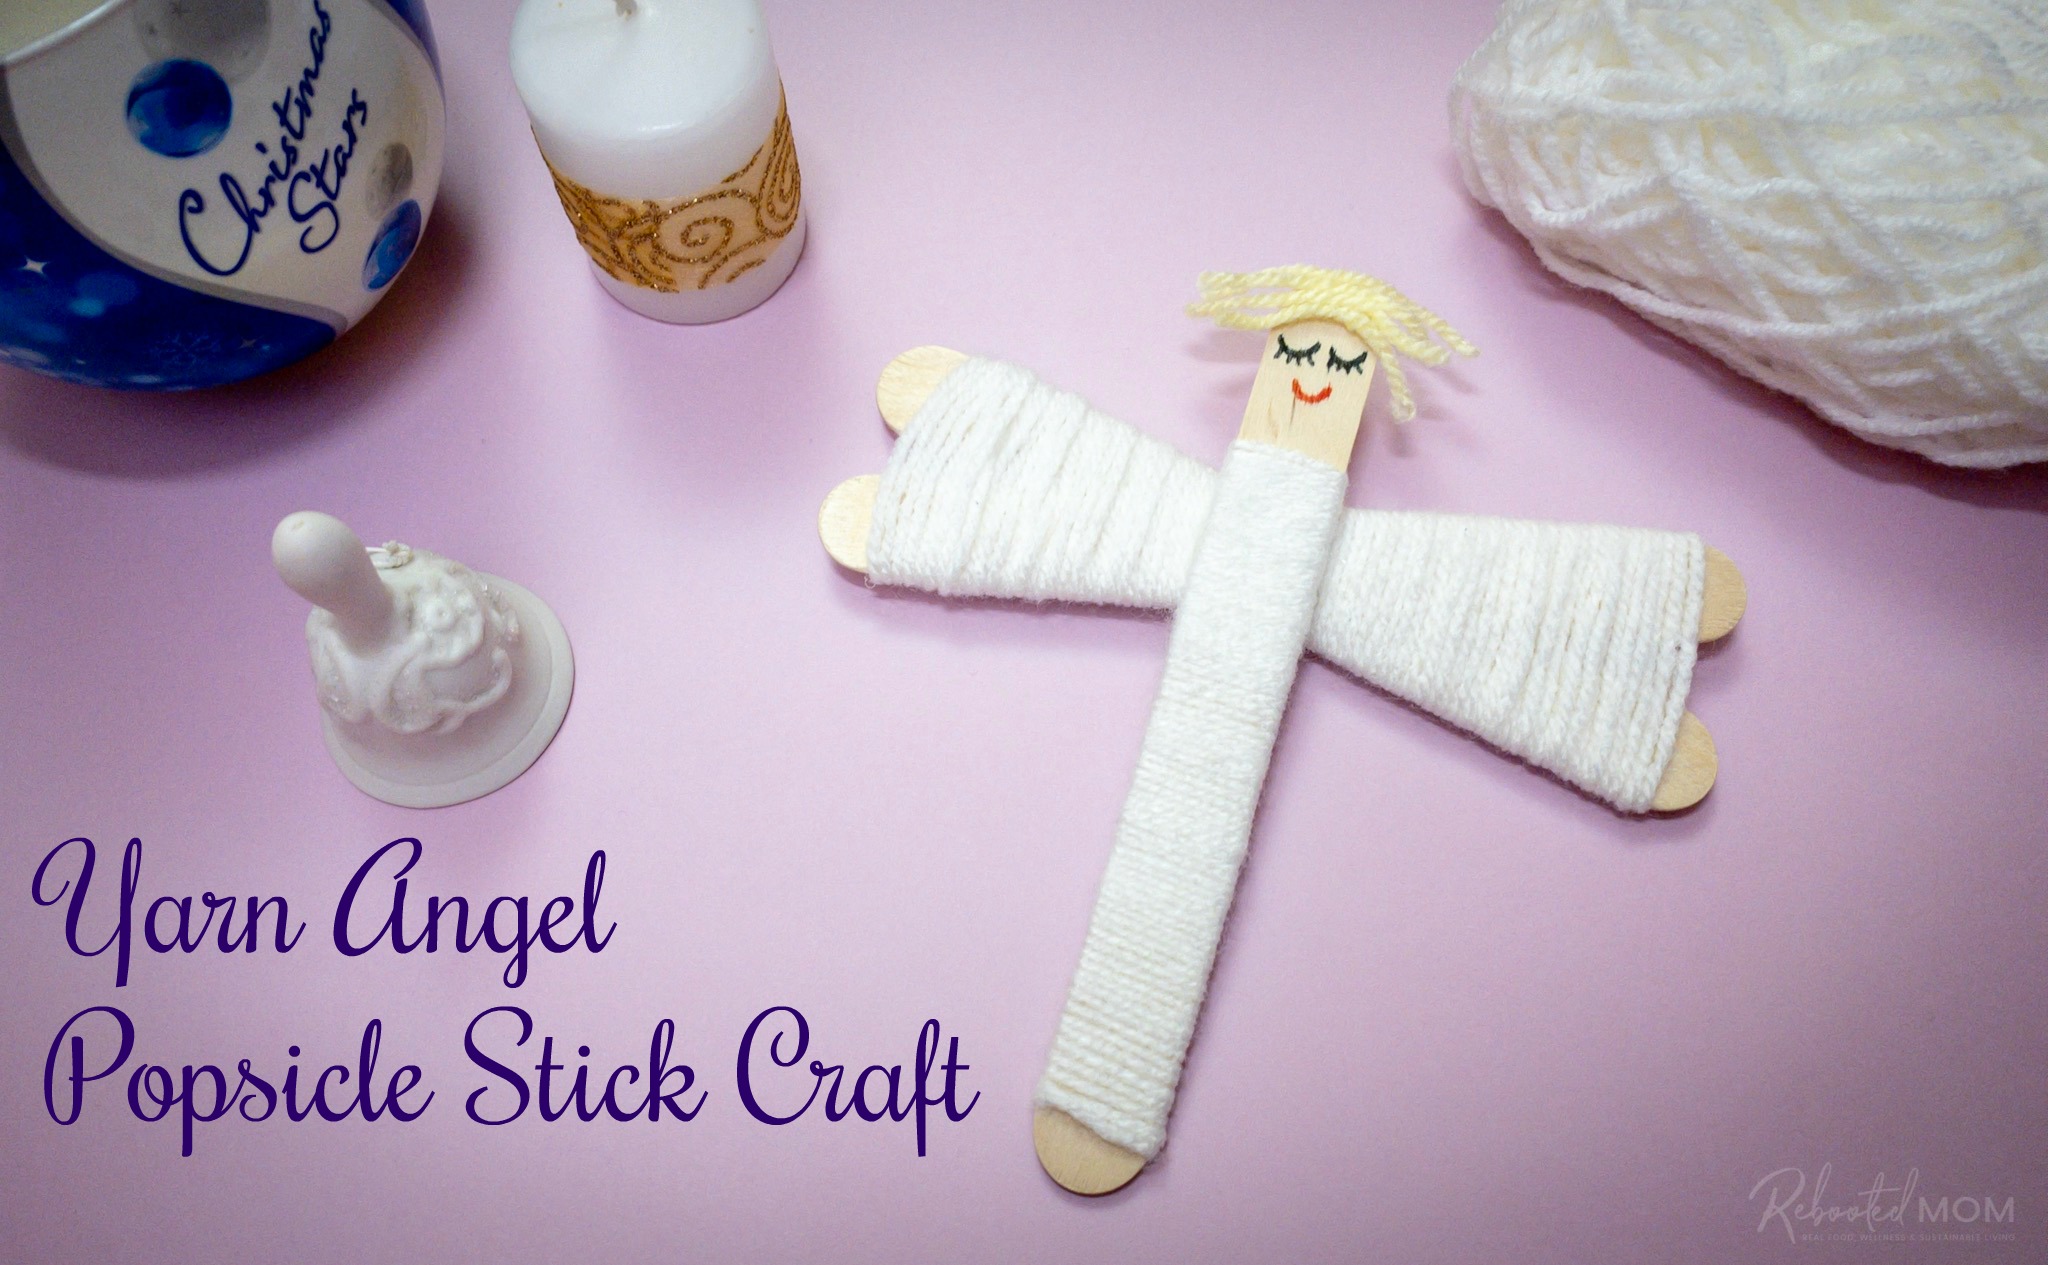 Step by step instructions &  video to help your children create an adorable yarn angel popsicle stick craft you can use as an ornament this holiday season!